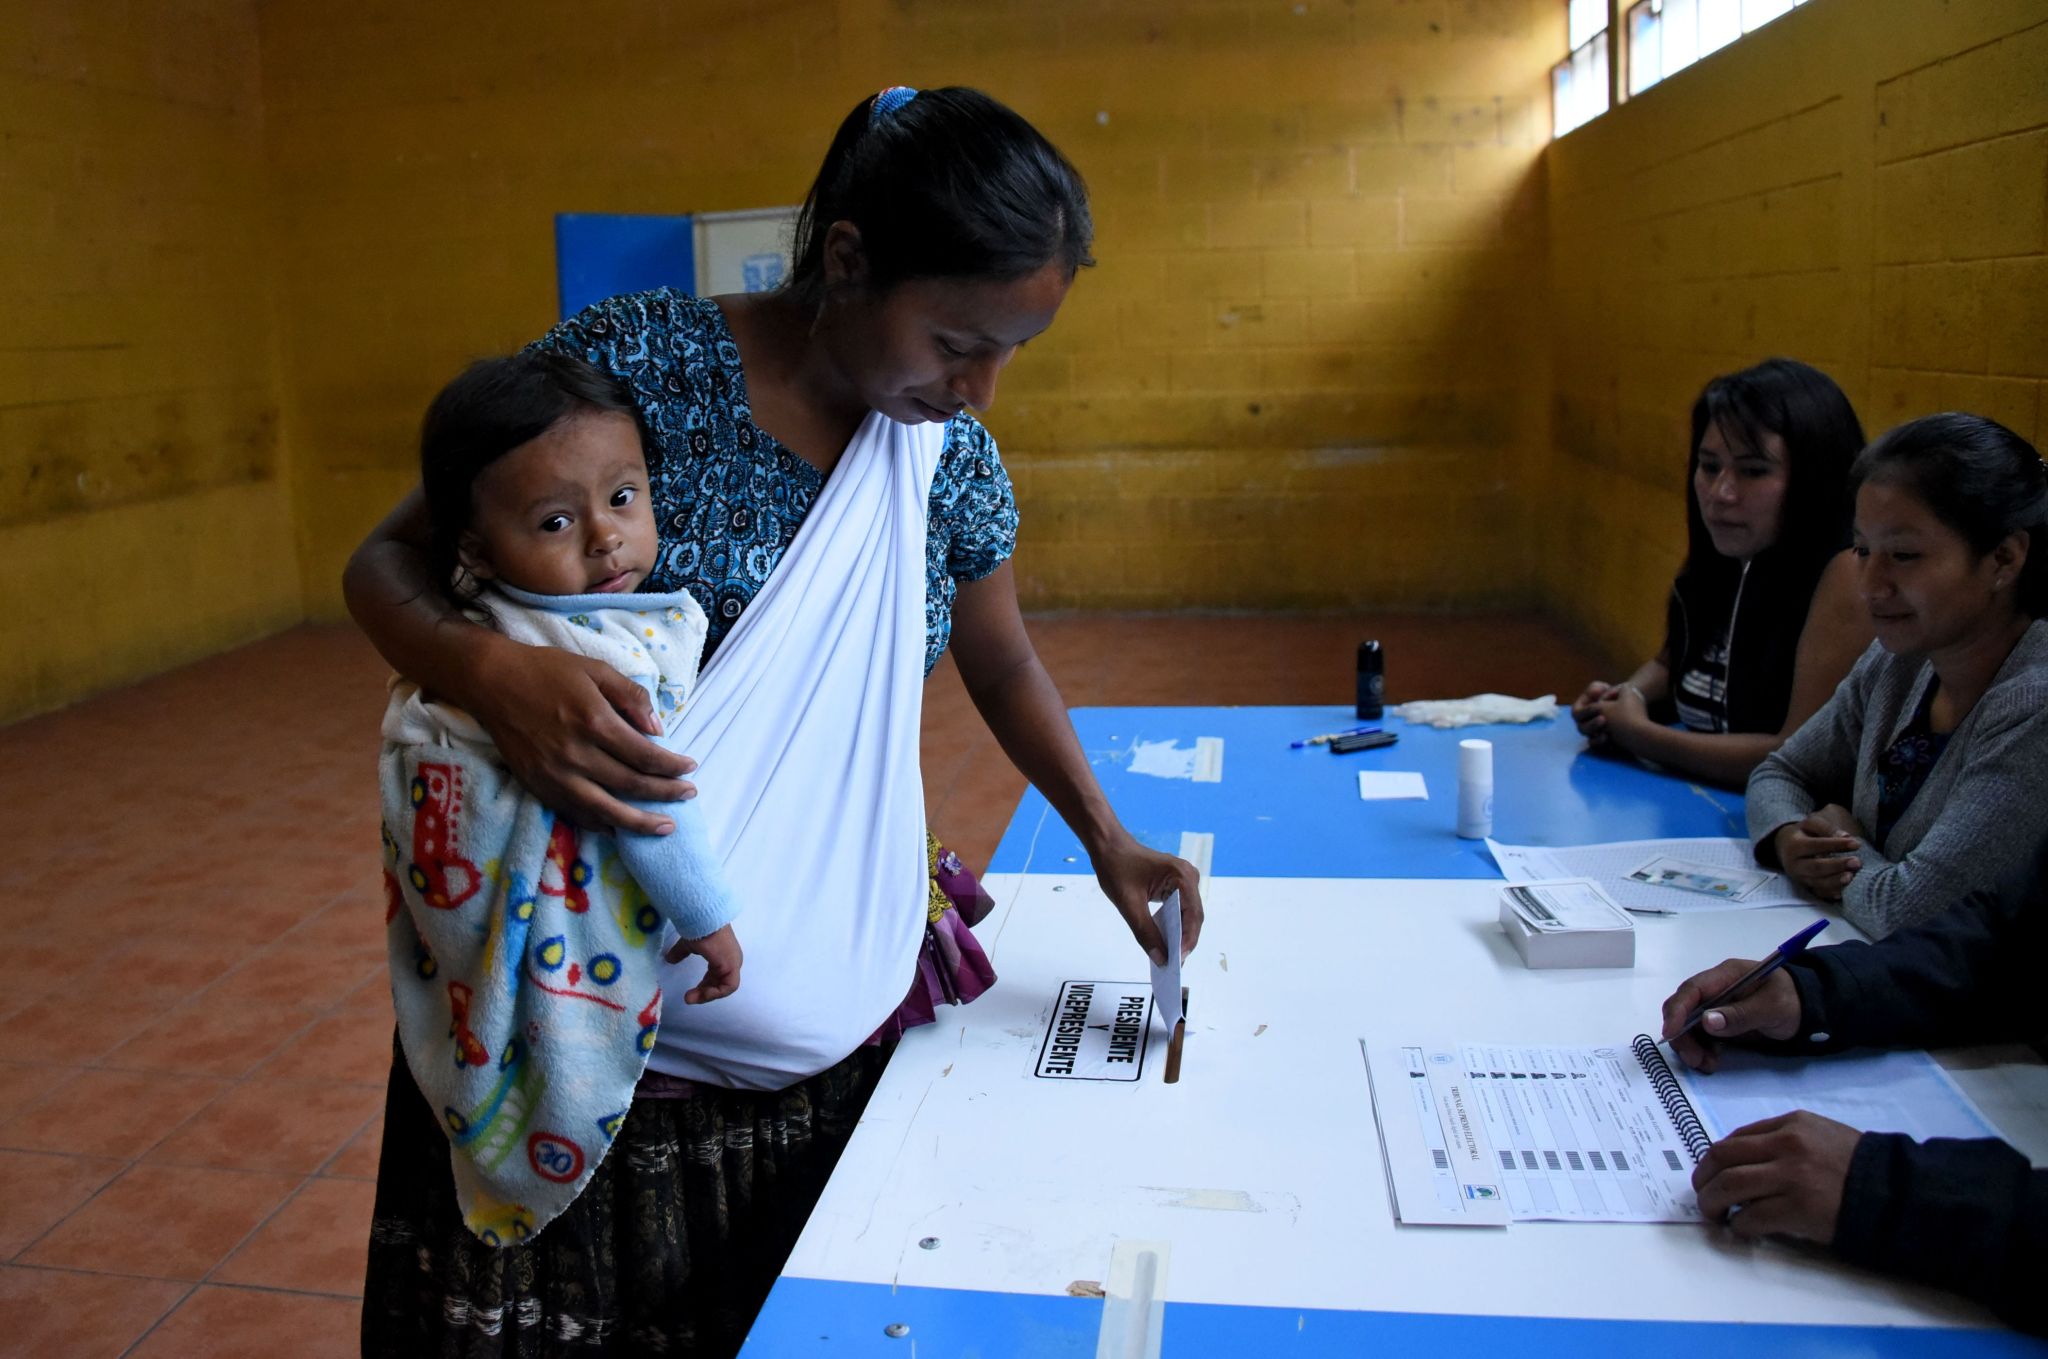 An indigenous woman holding a baby casts her vote